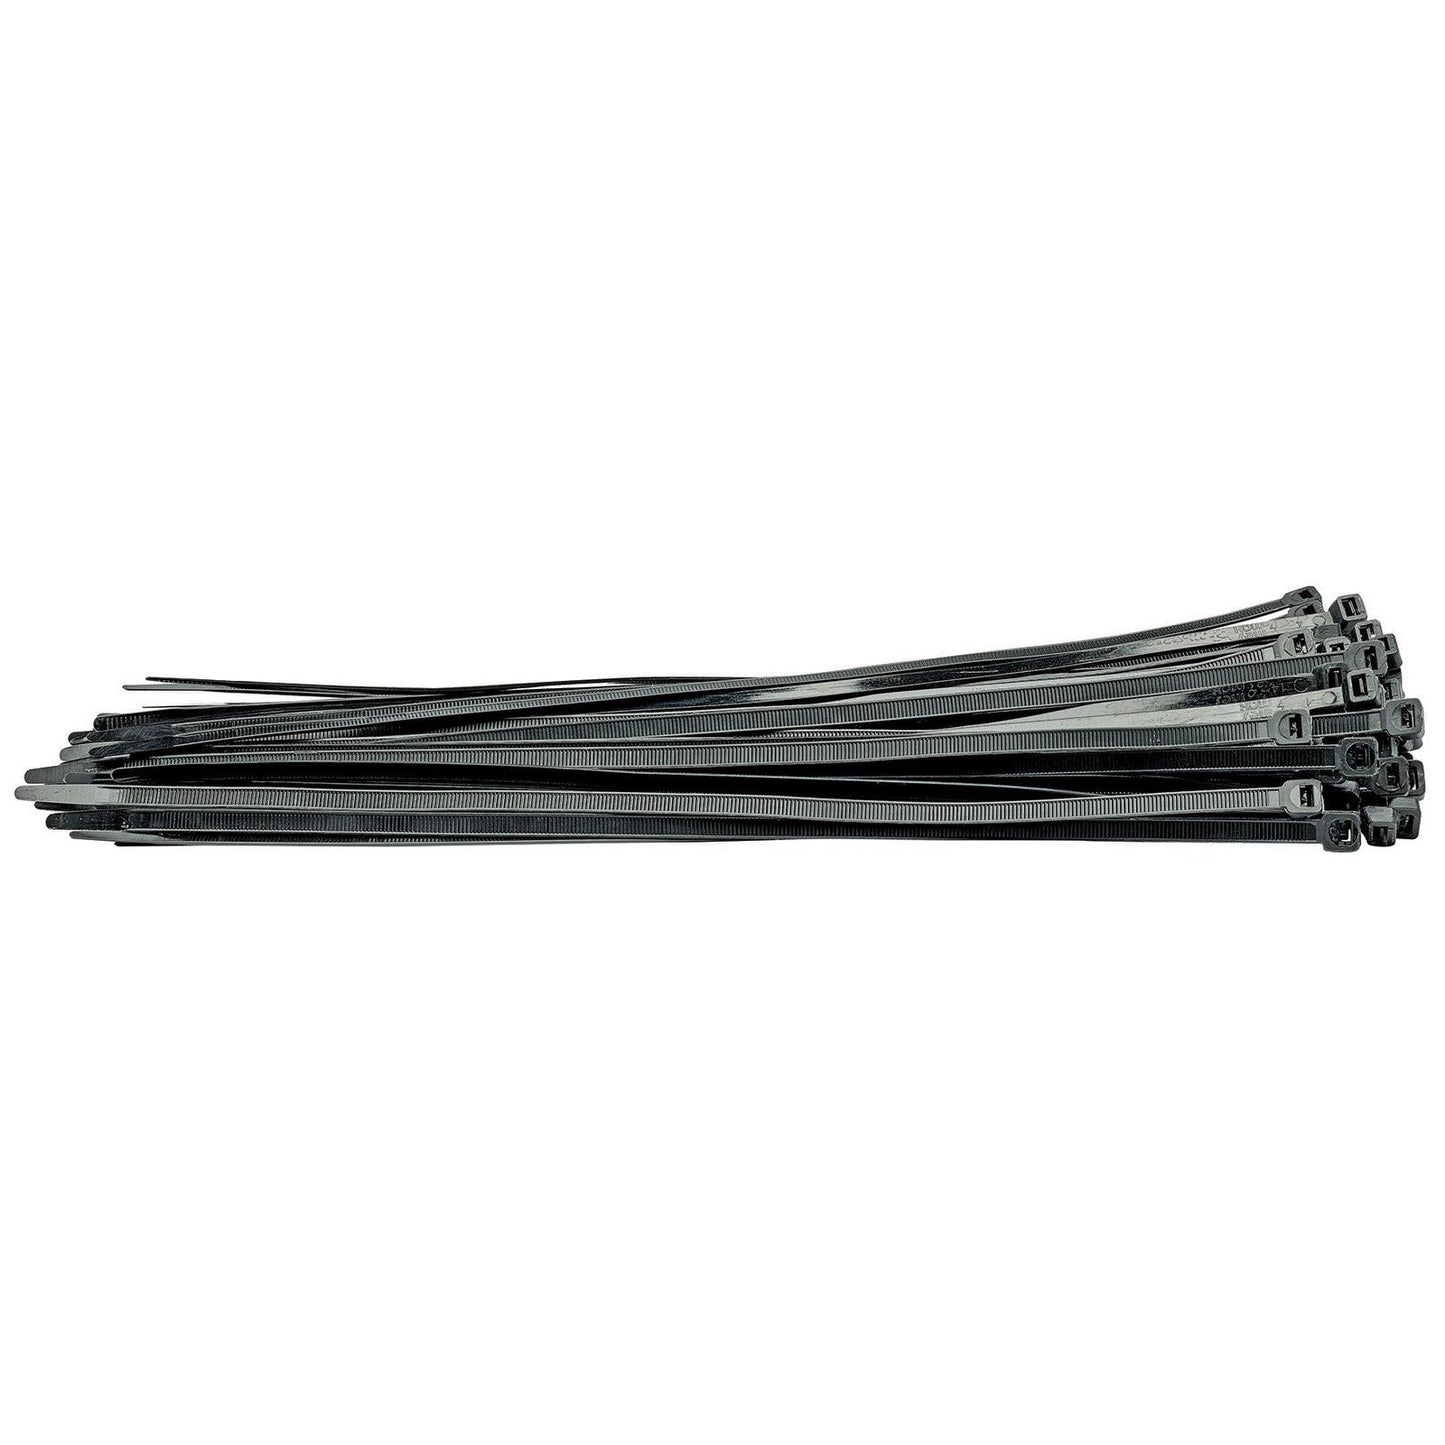 Draper High Quality Black Cable Ties (100 Pieces) - 70403